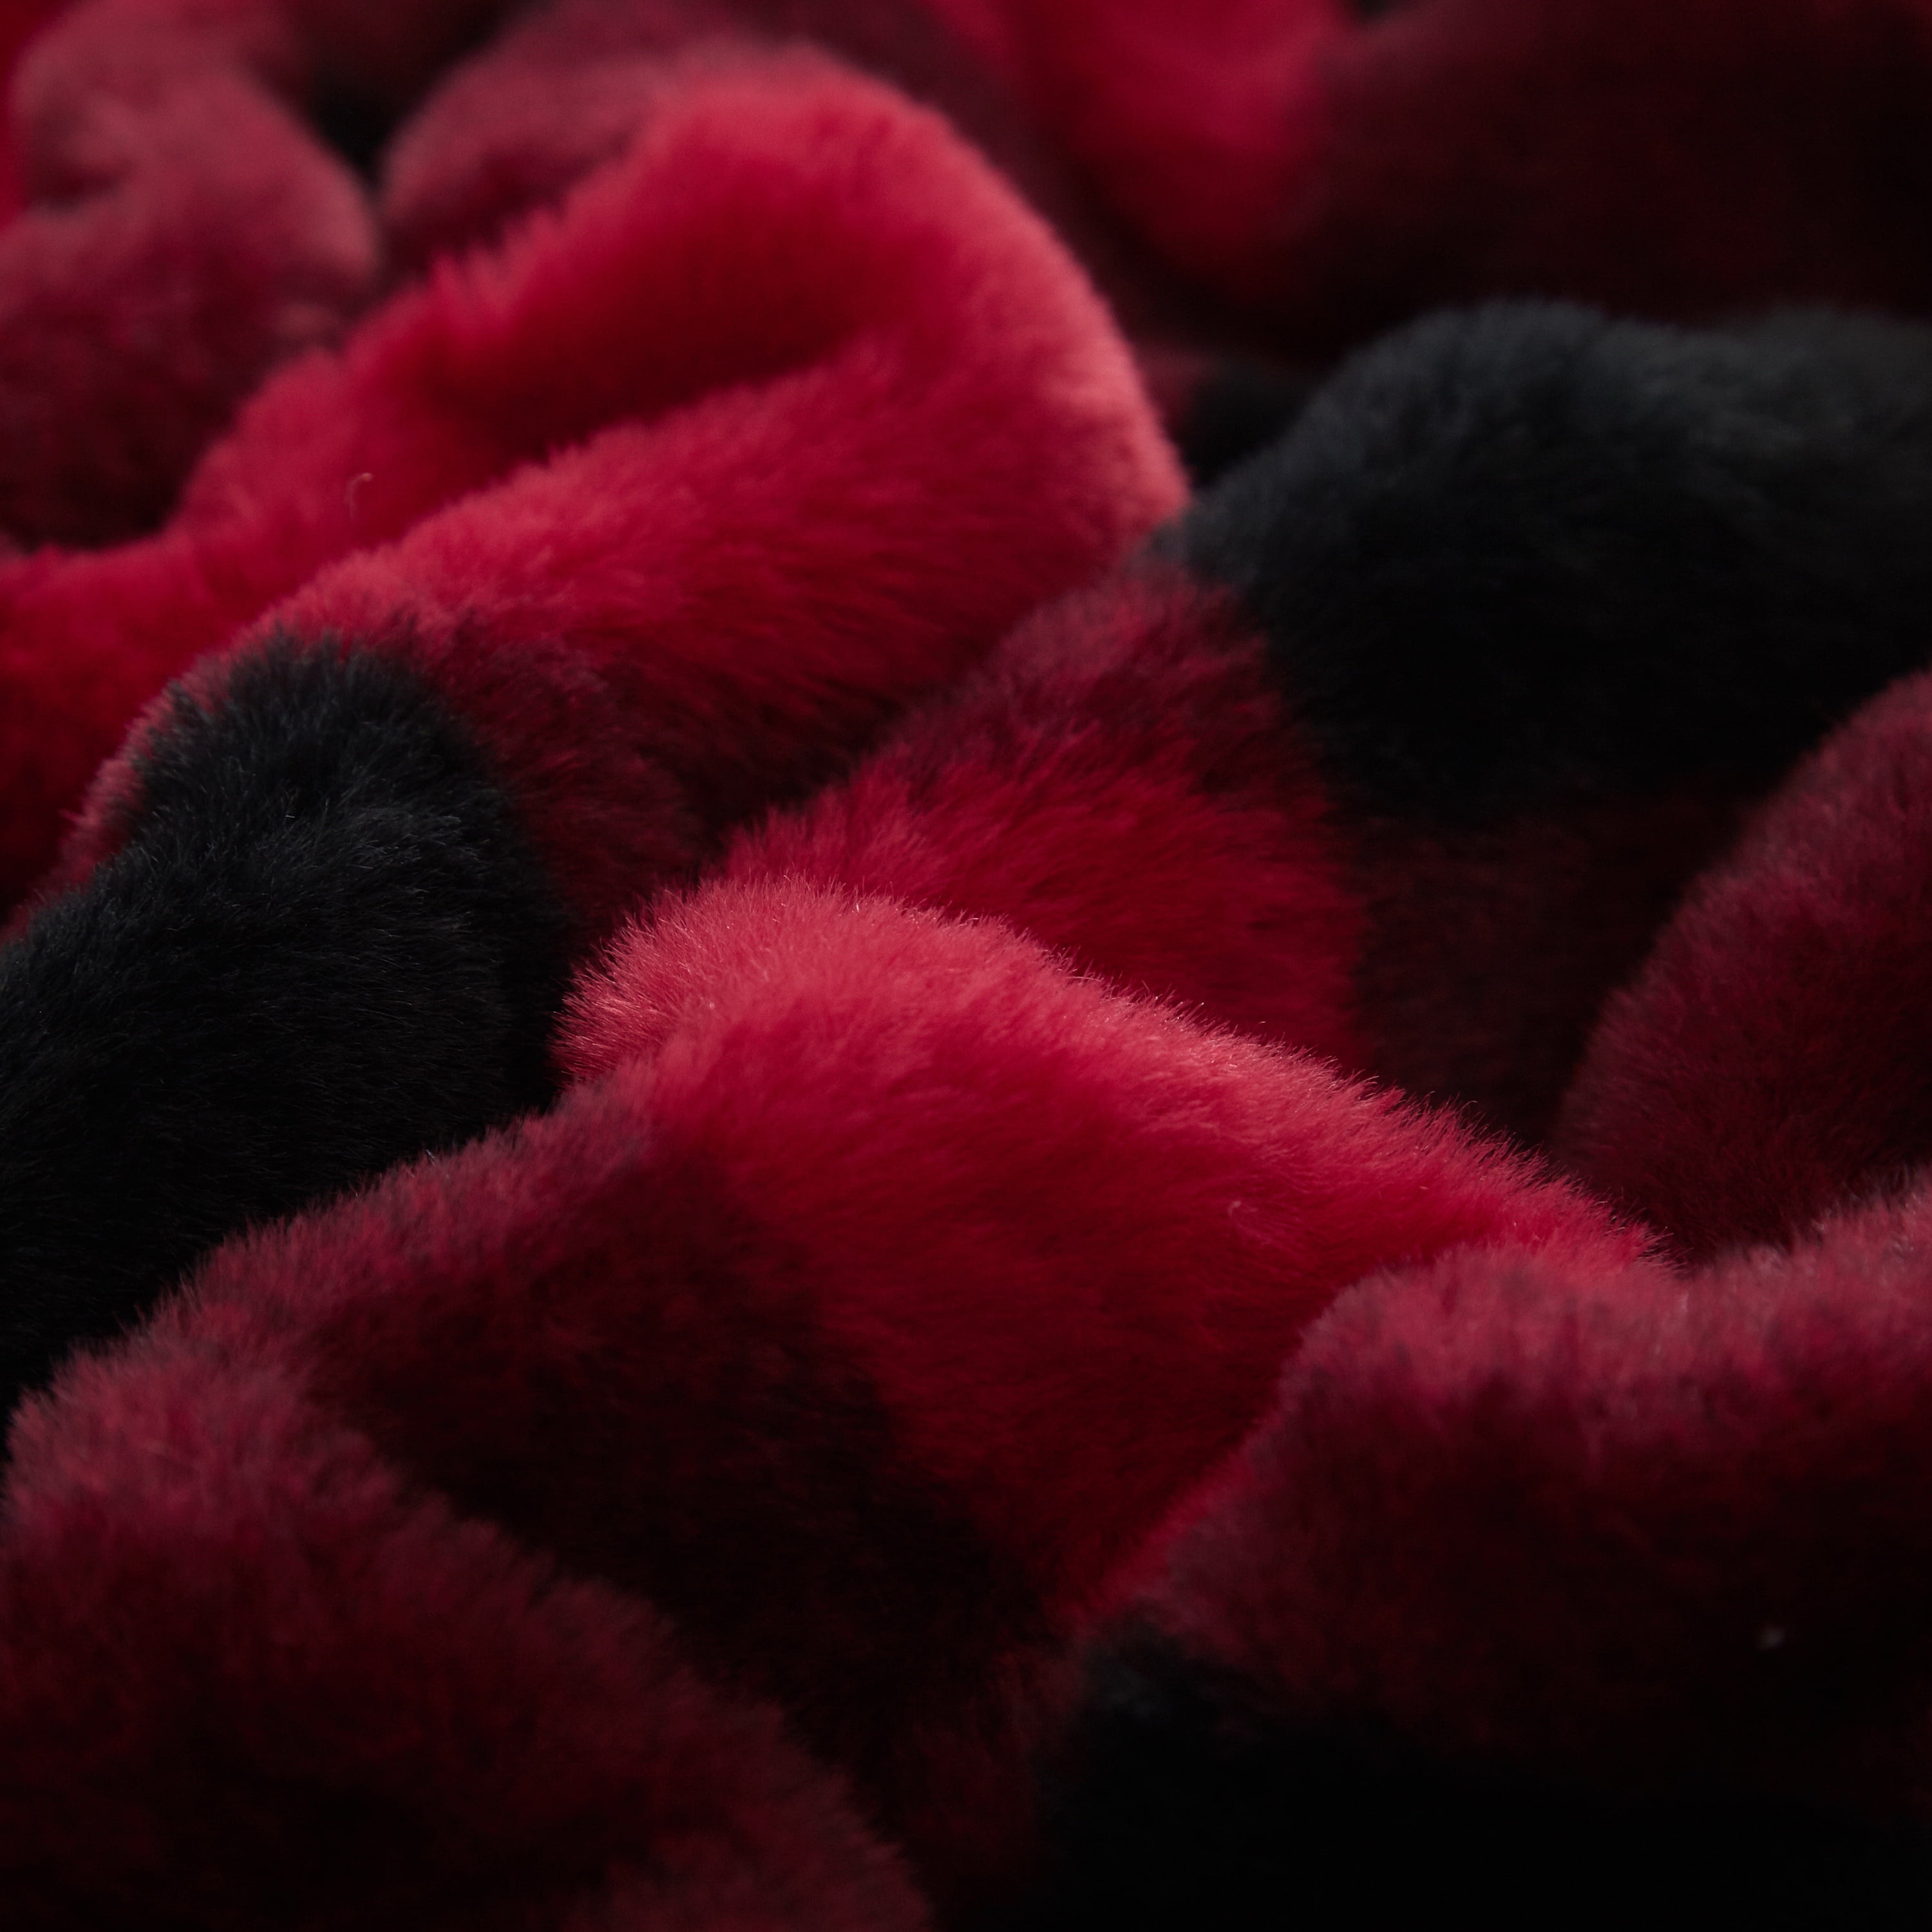 Dearfoams Red Buffalo Check Faux Fur with Micromink Reverse Throw, Red/Black,  50 in x 60 in 